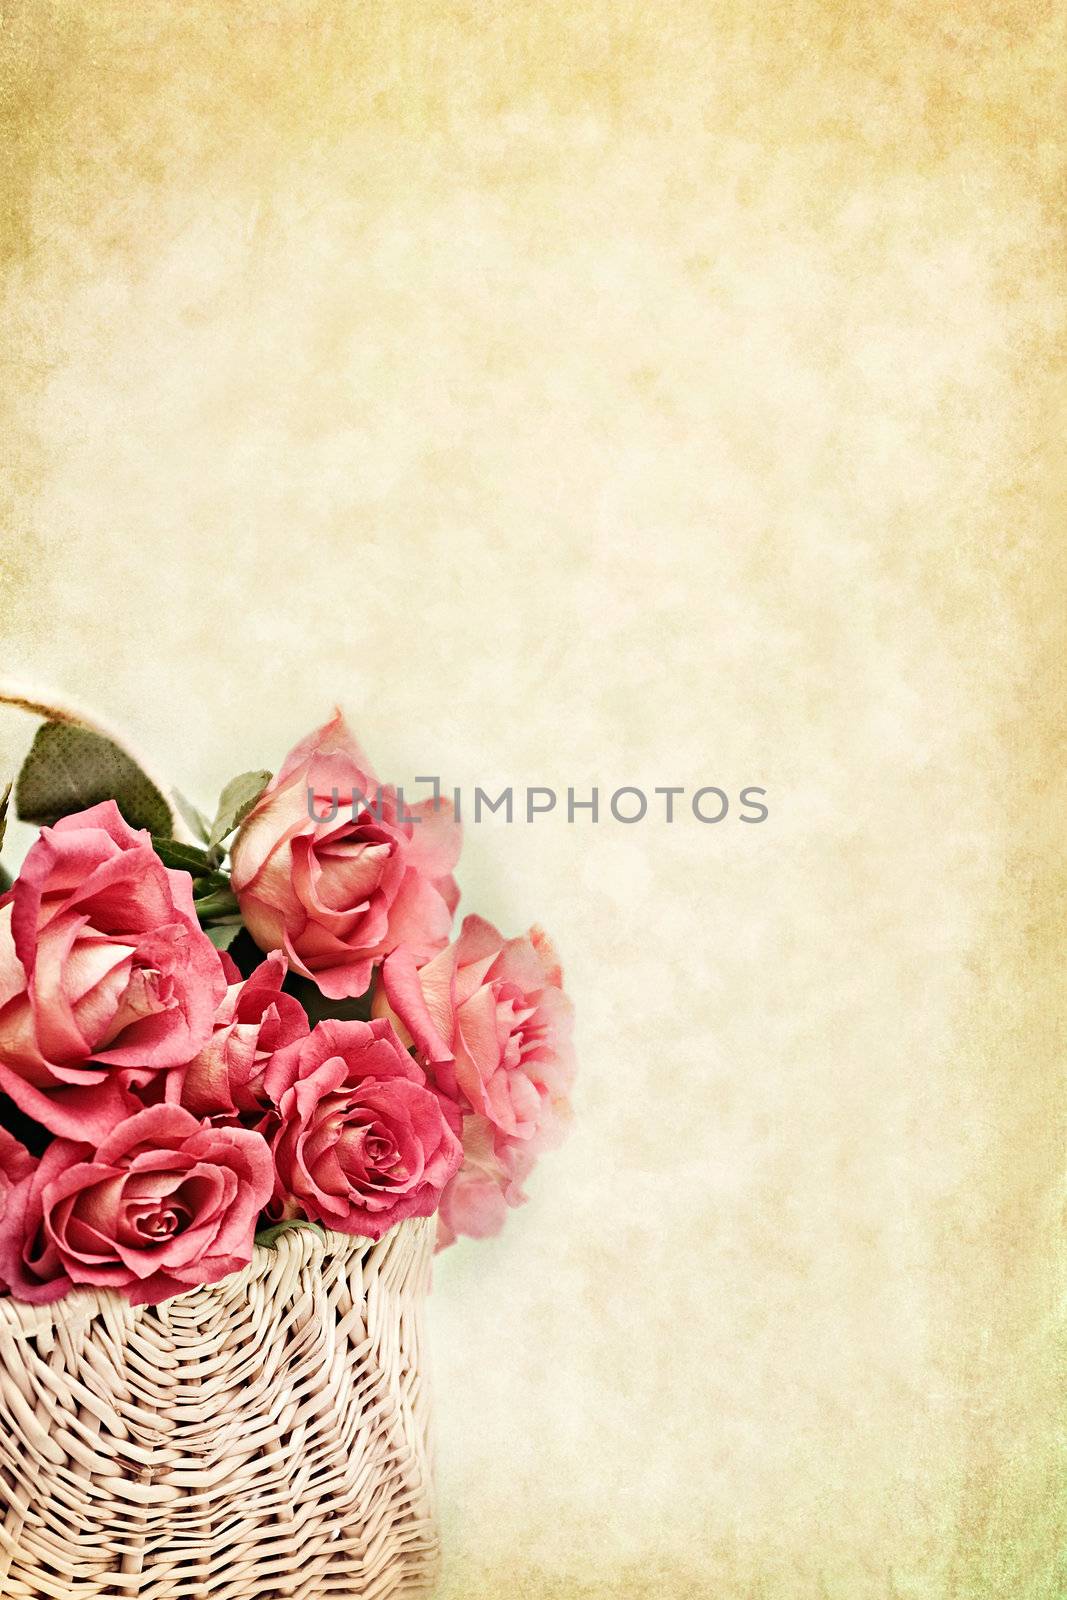 Basket of pink long stem roses with copy space available.